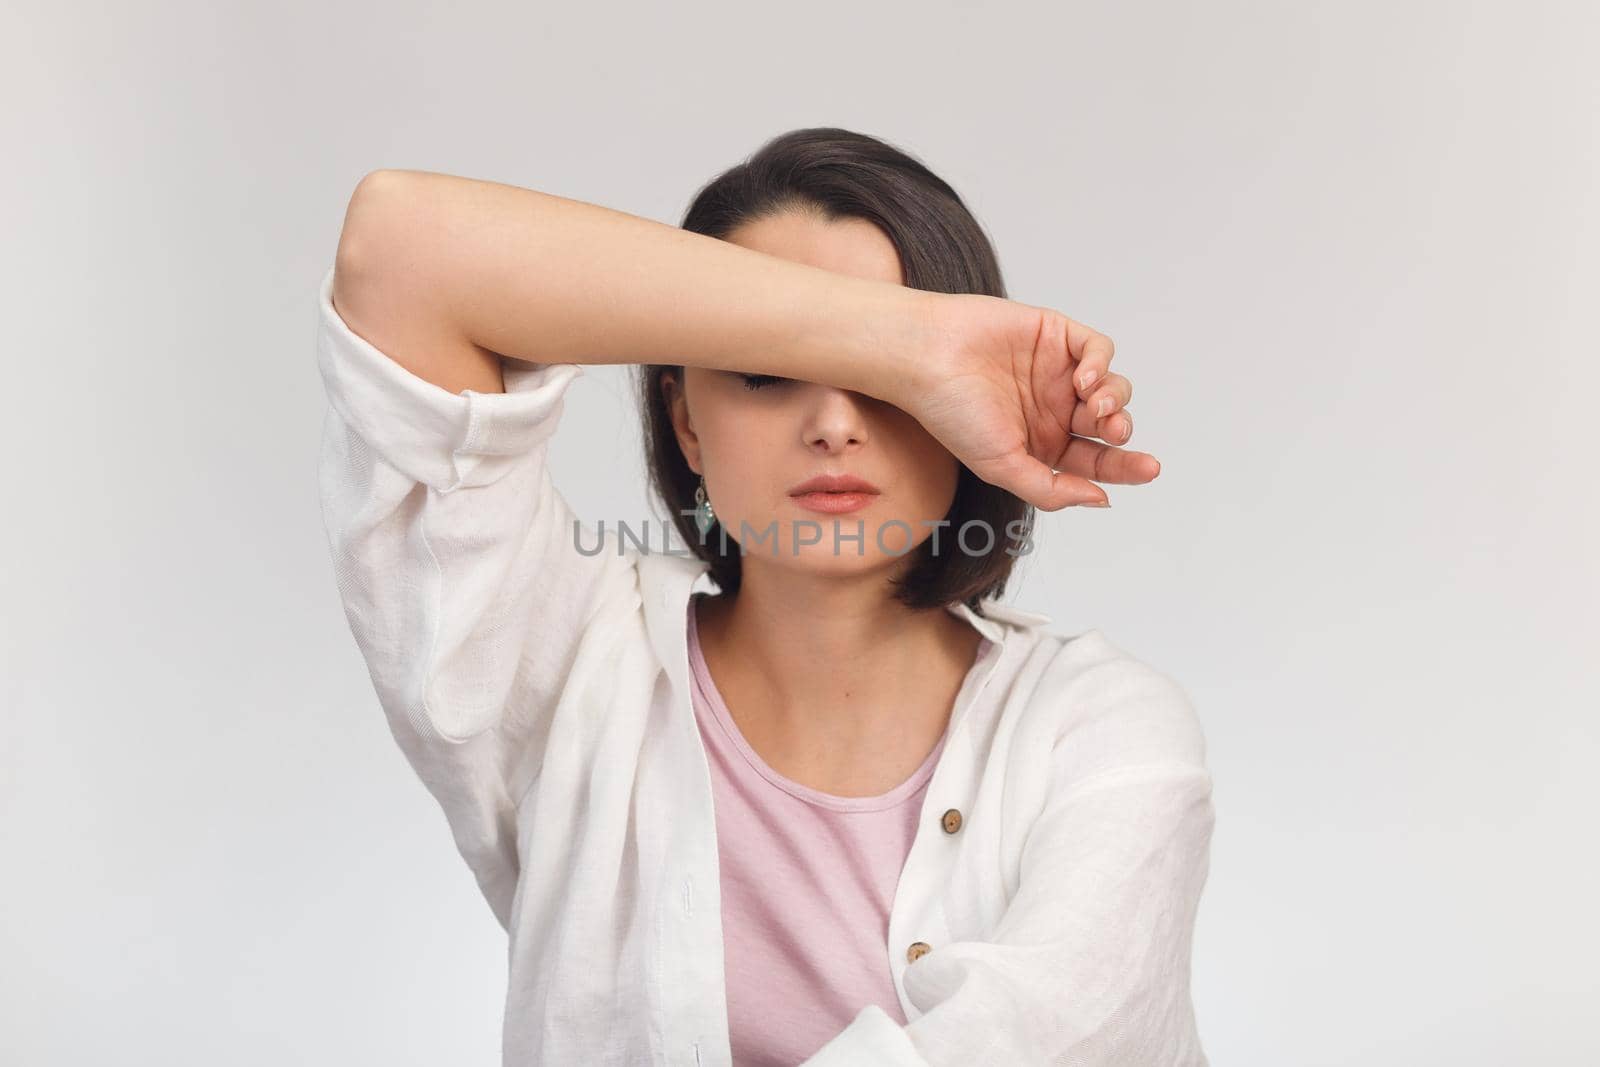 High-key studio portrait of a young woman in light clothes covering her eyes with her hand by Rom4ek